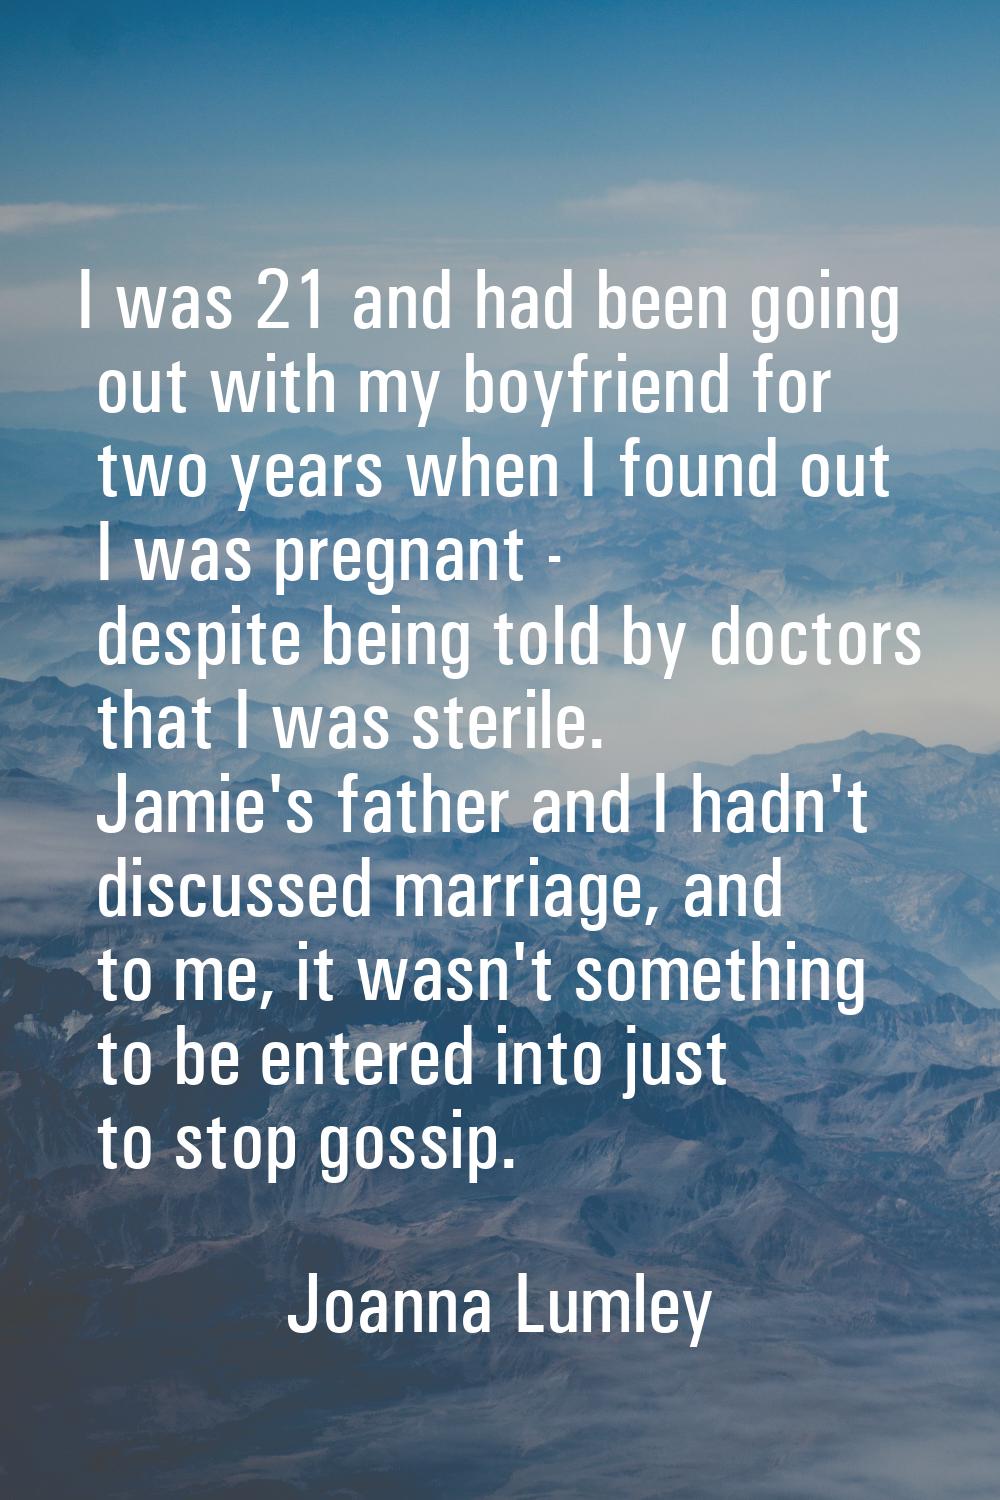 I was 21 and had been going out with my boyfriend for two years when I found out I was pregnant - d